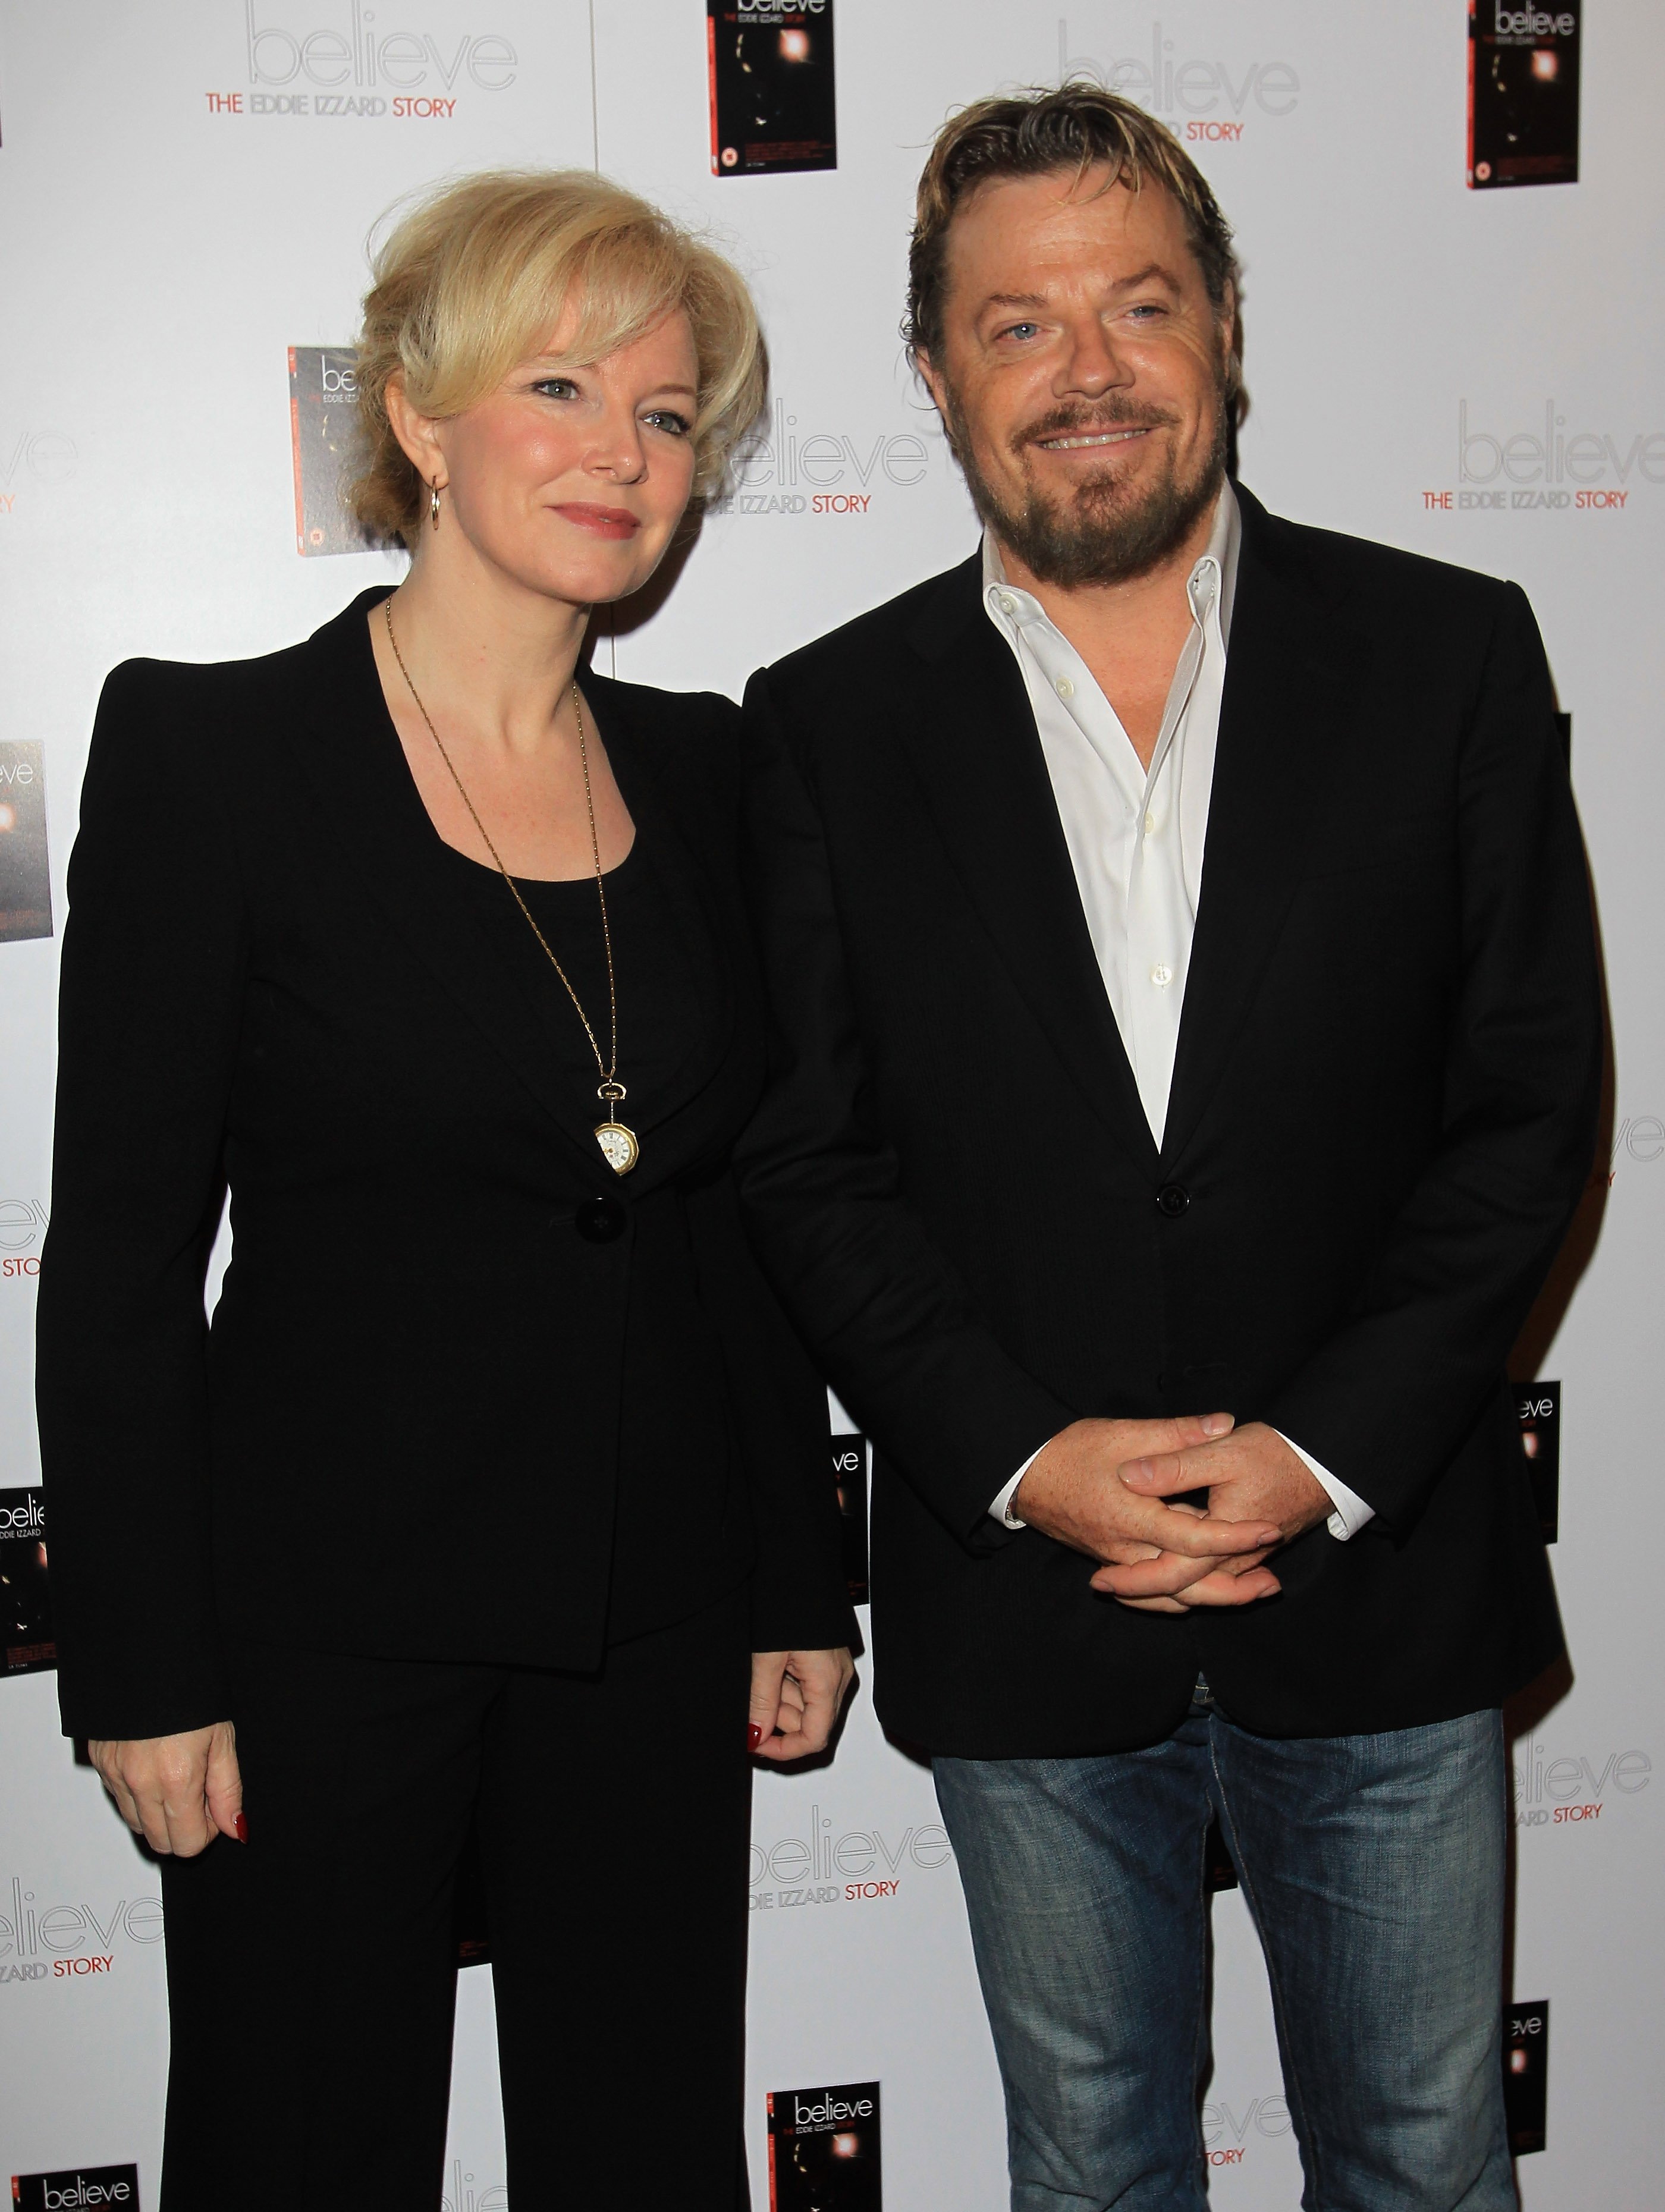 Sarah Townsend and Eddie Izzard at the London premiere of Eddie Izzard's DVD on November 18, 2010 | Source: Getty Images